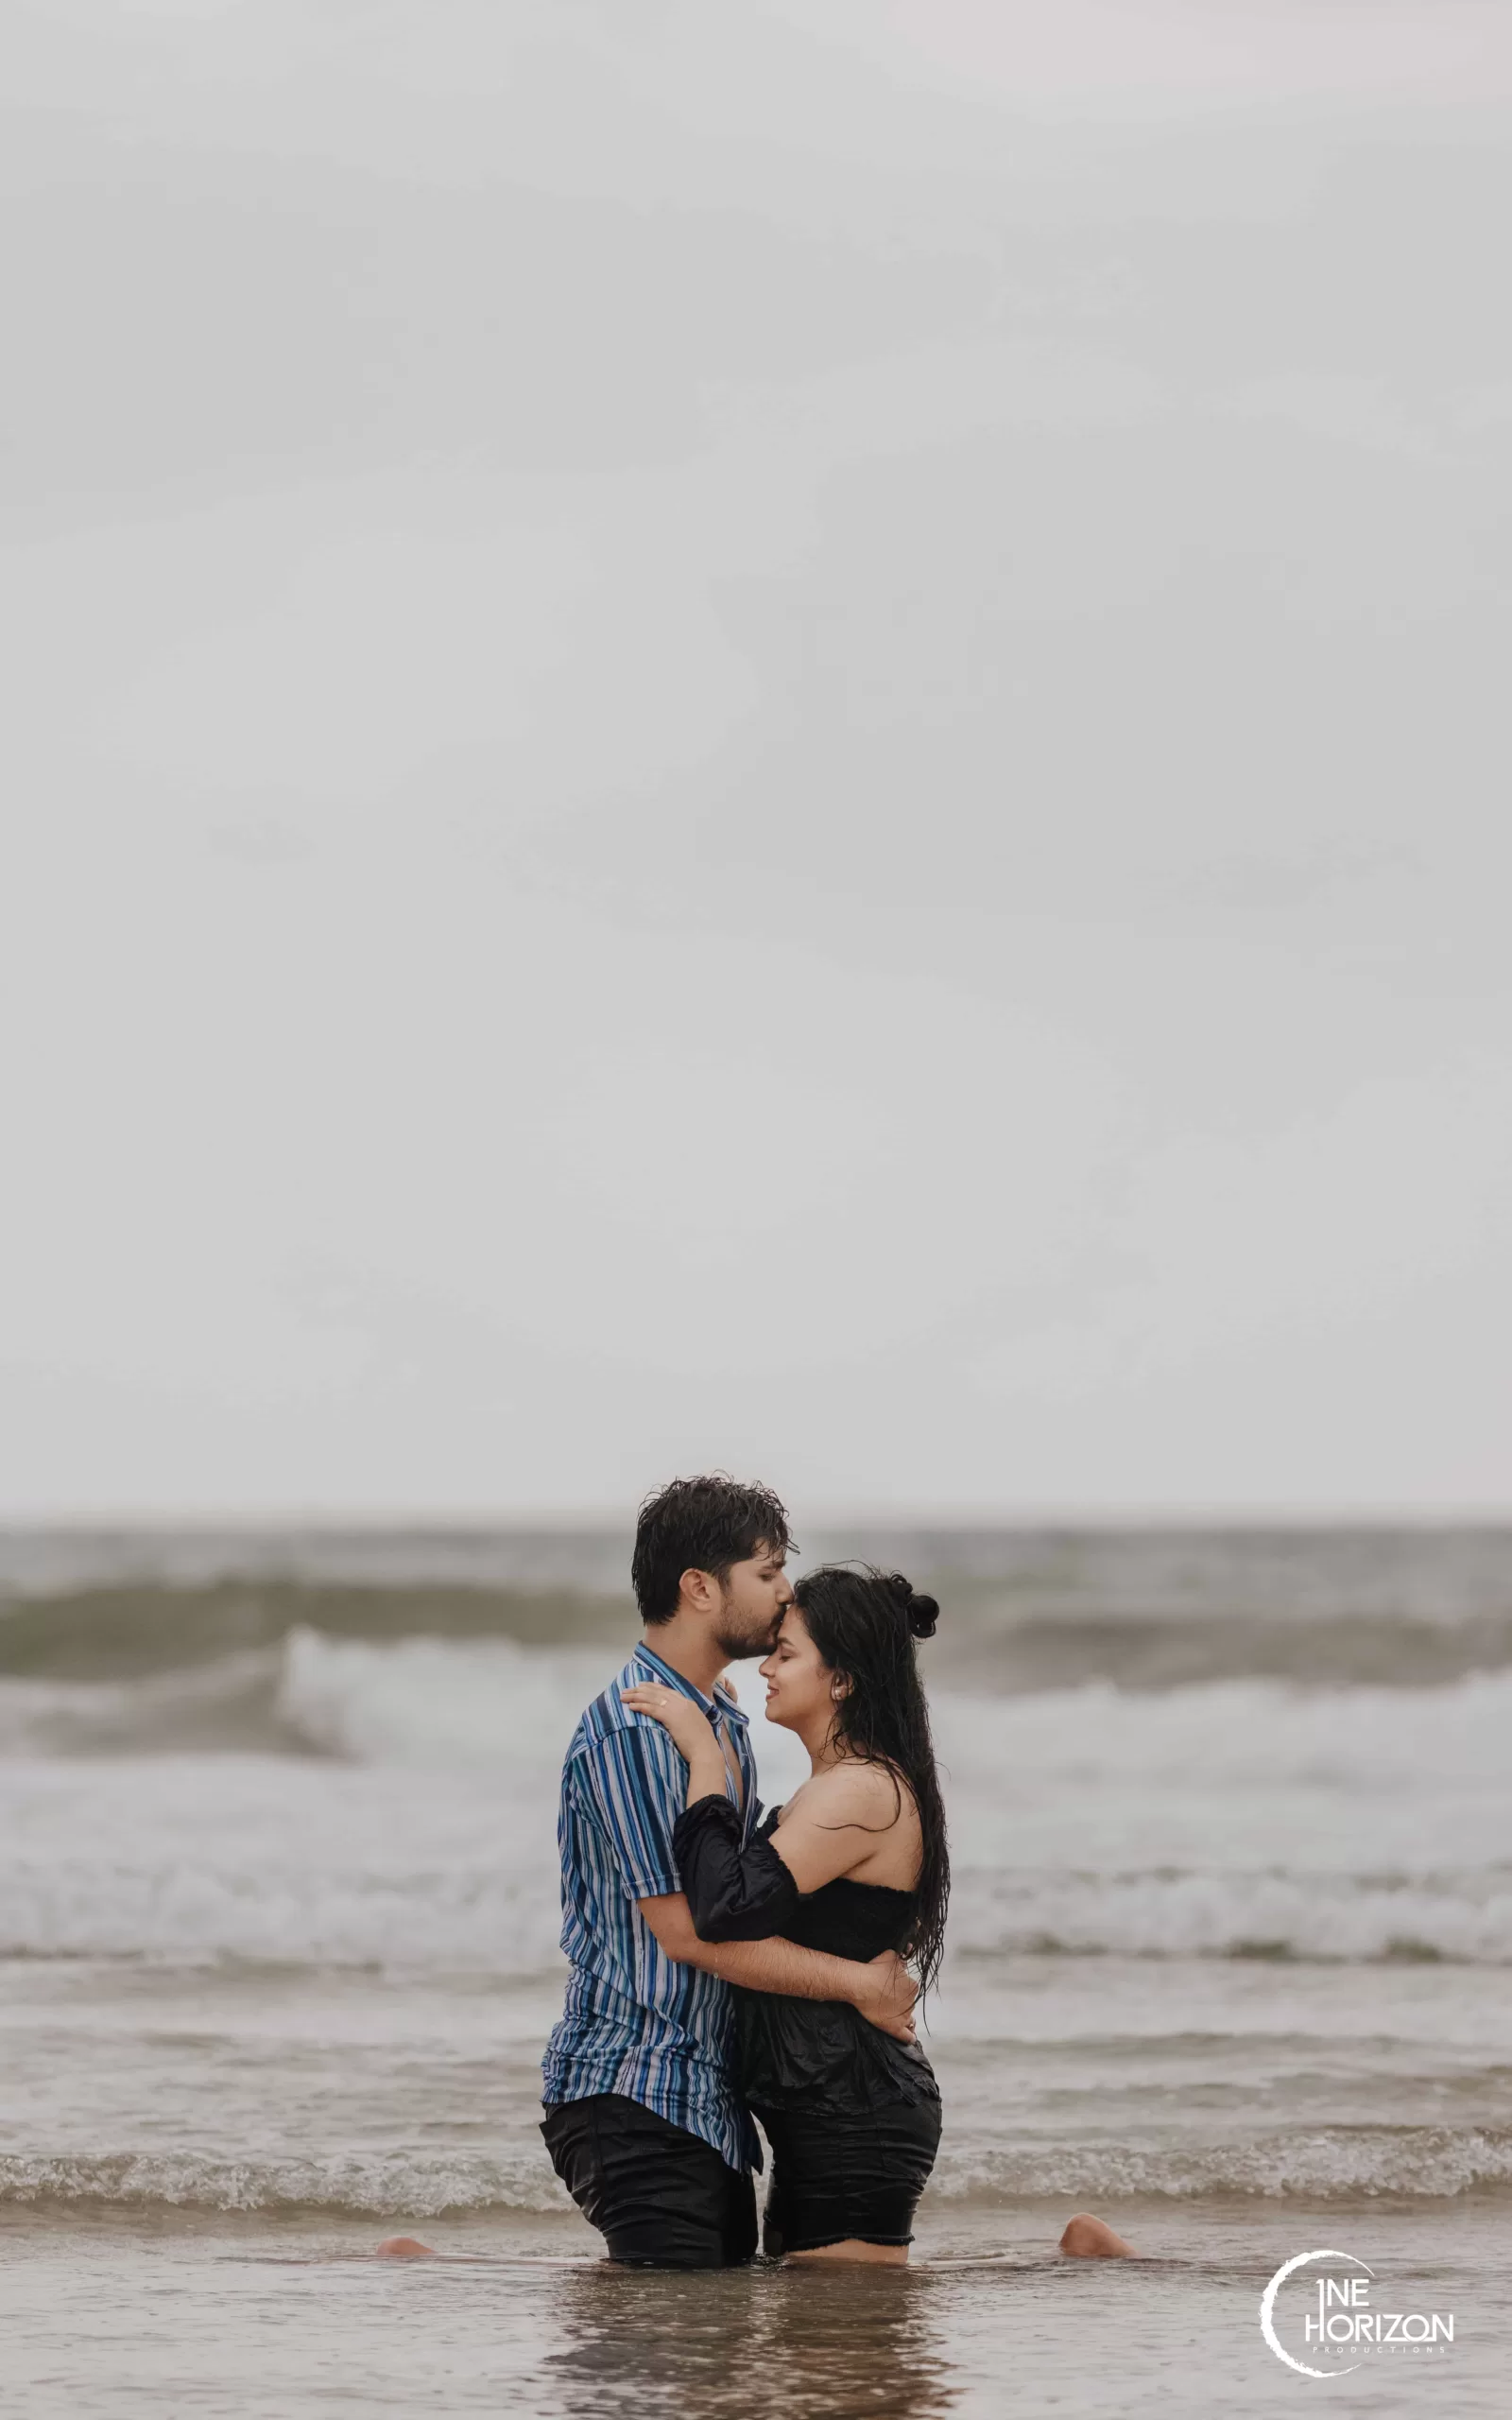 Image may contain: 1 person, outdoor | Wedding couple poses photography, Pre  wedding photoshoot outdoor, Wedding couple poses